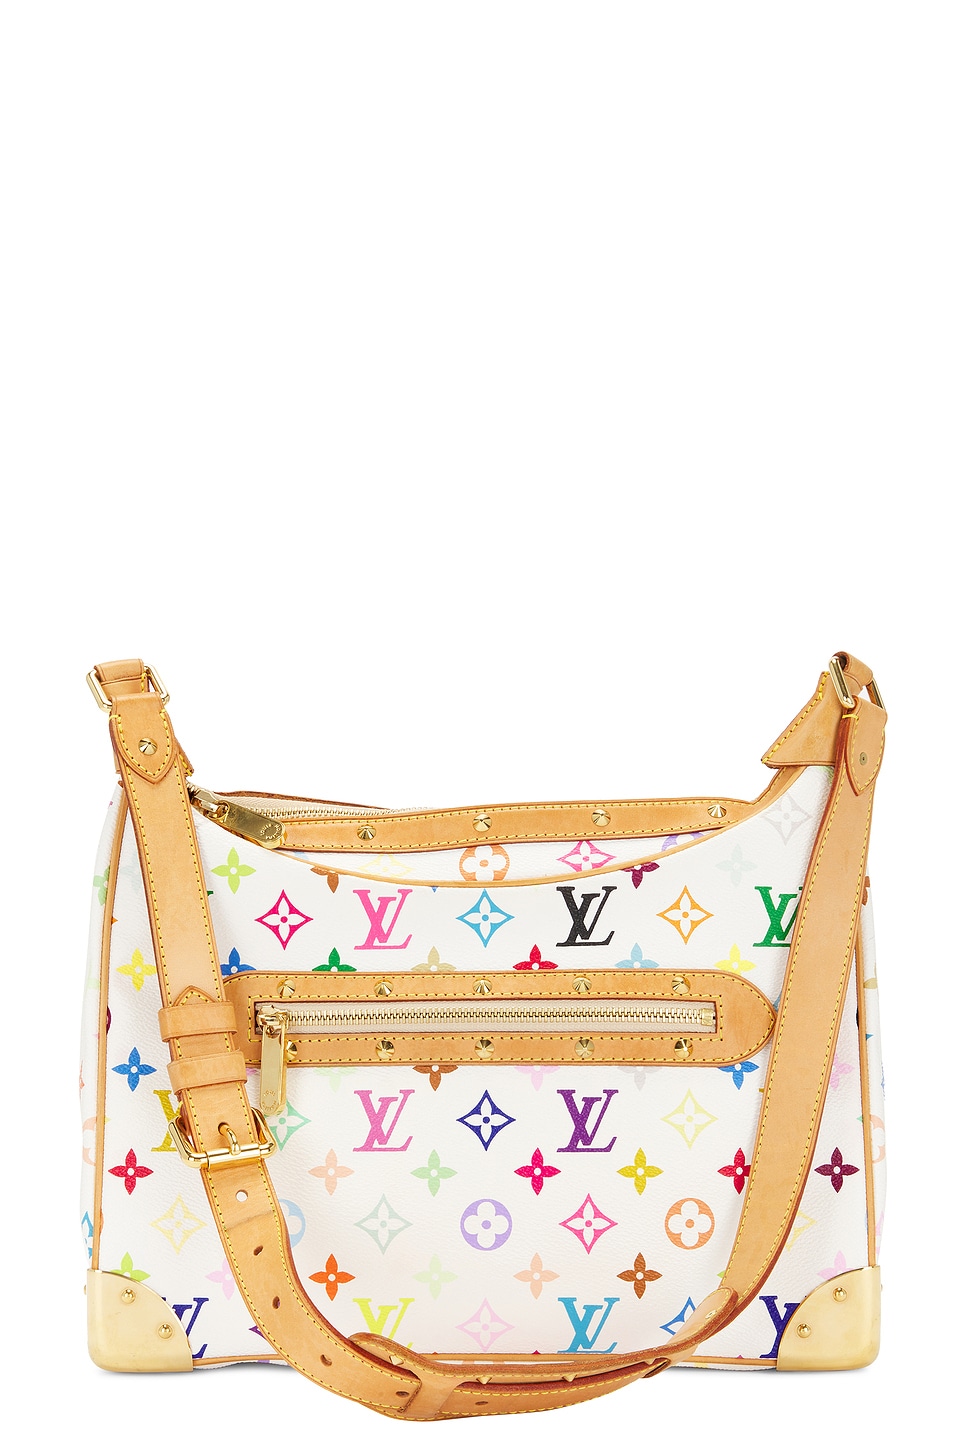 Pre-owned Louis Vuitton Boulogne Shoulder Bag In White